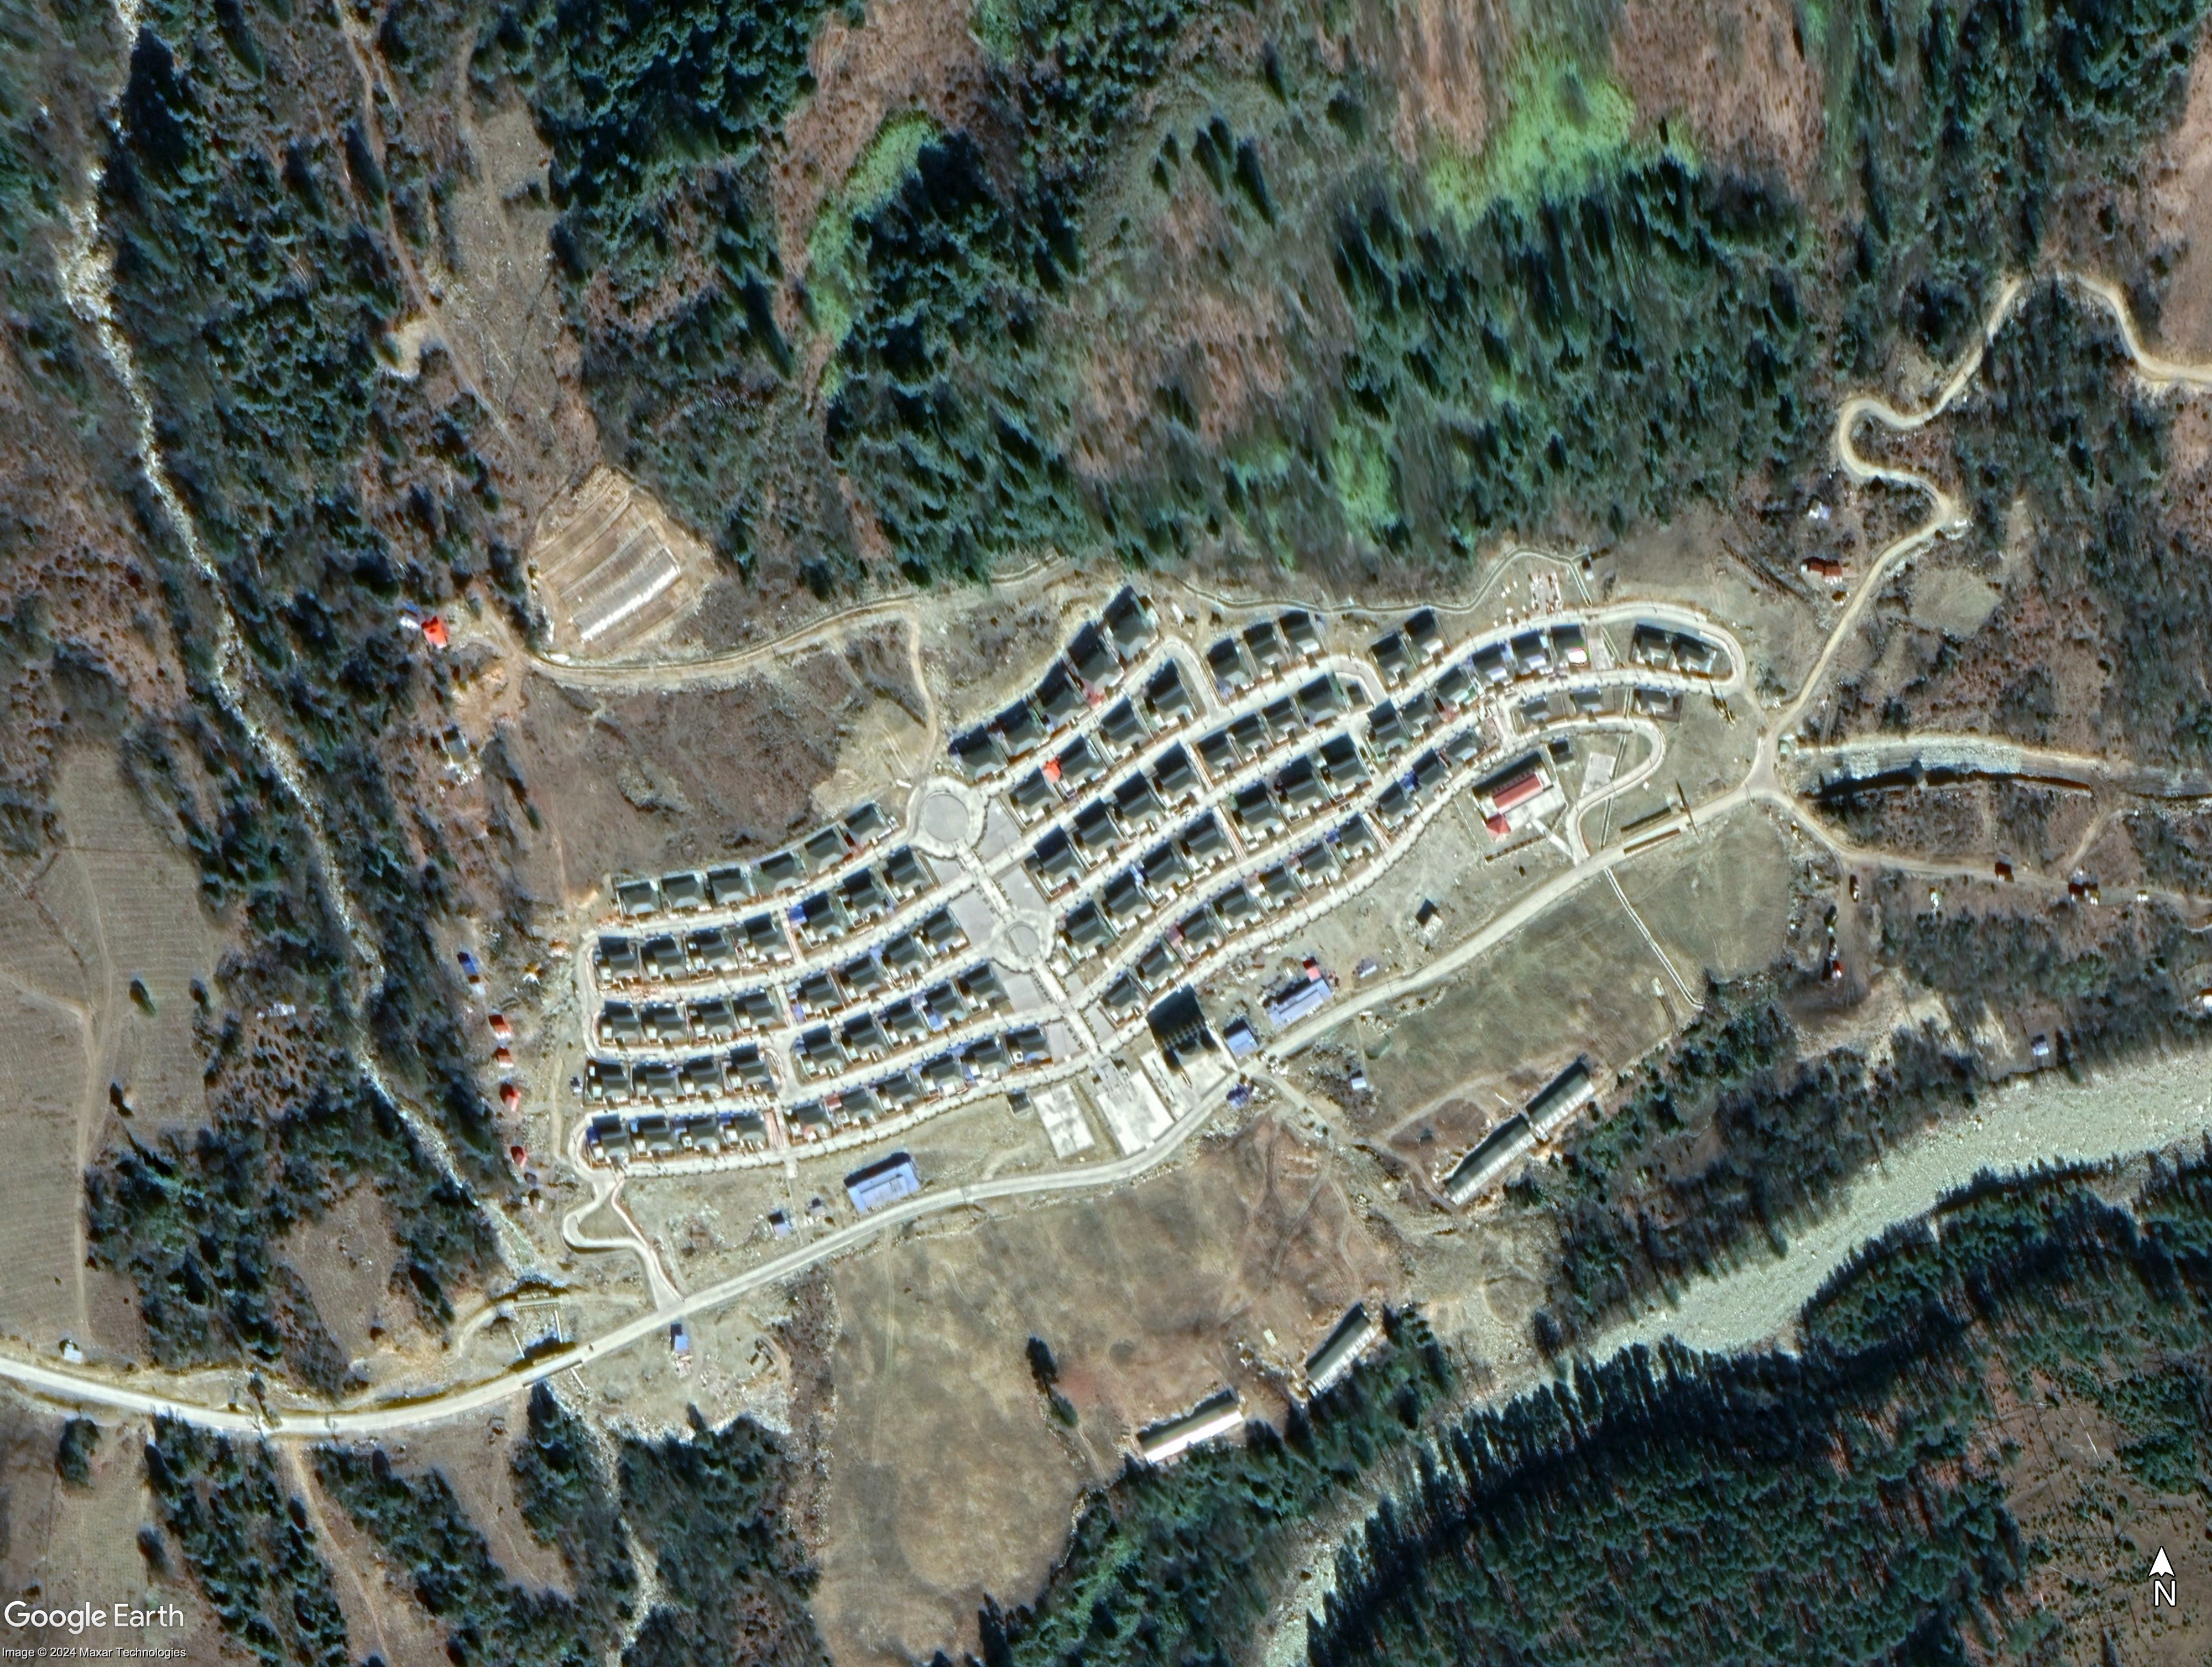 Satellite image showing the new Duolonggang village